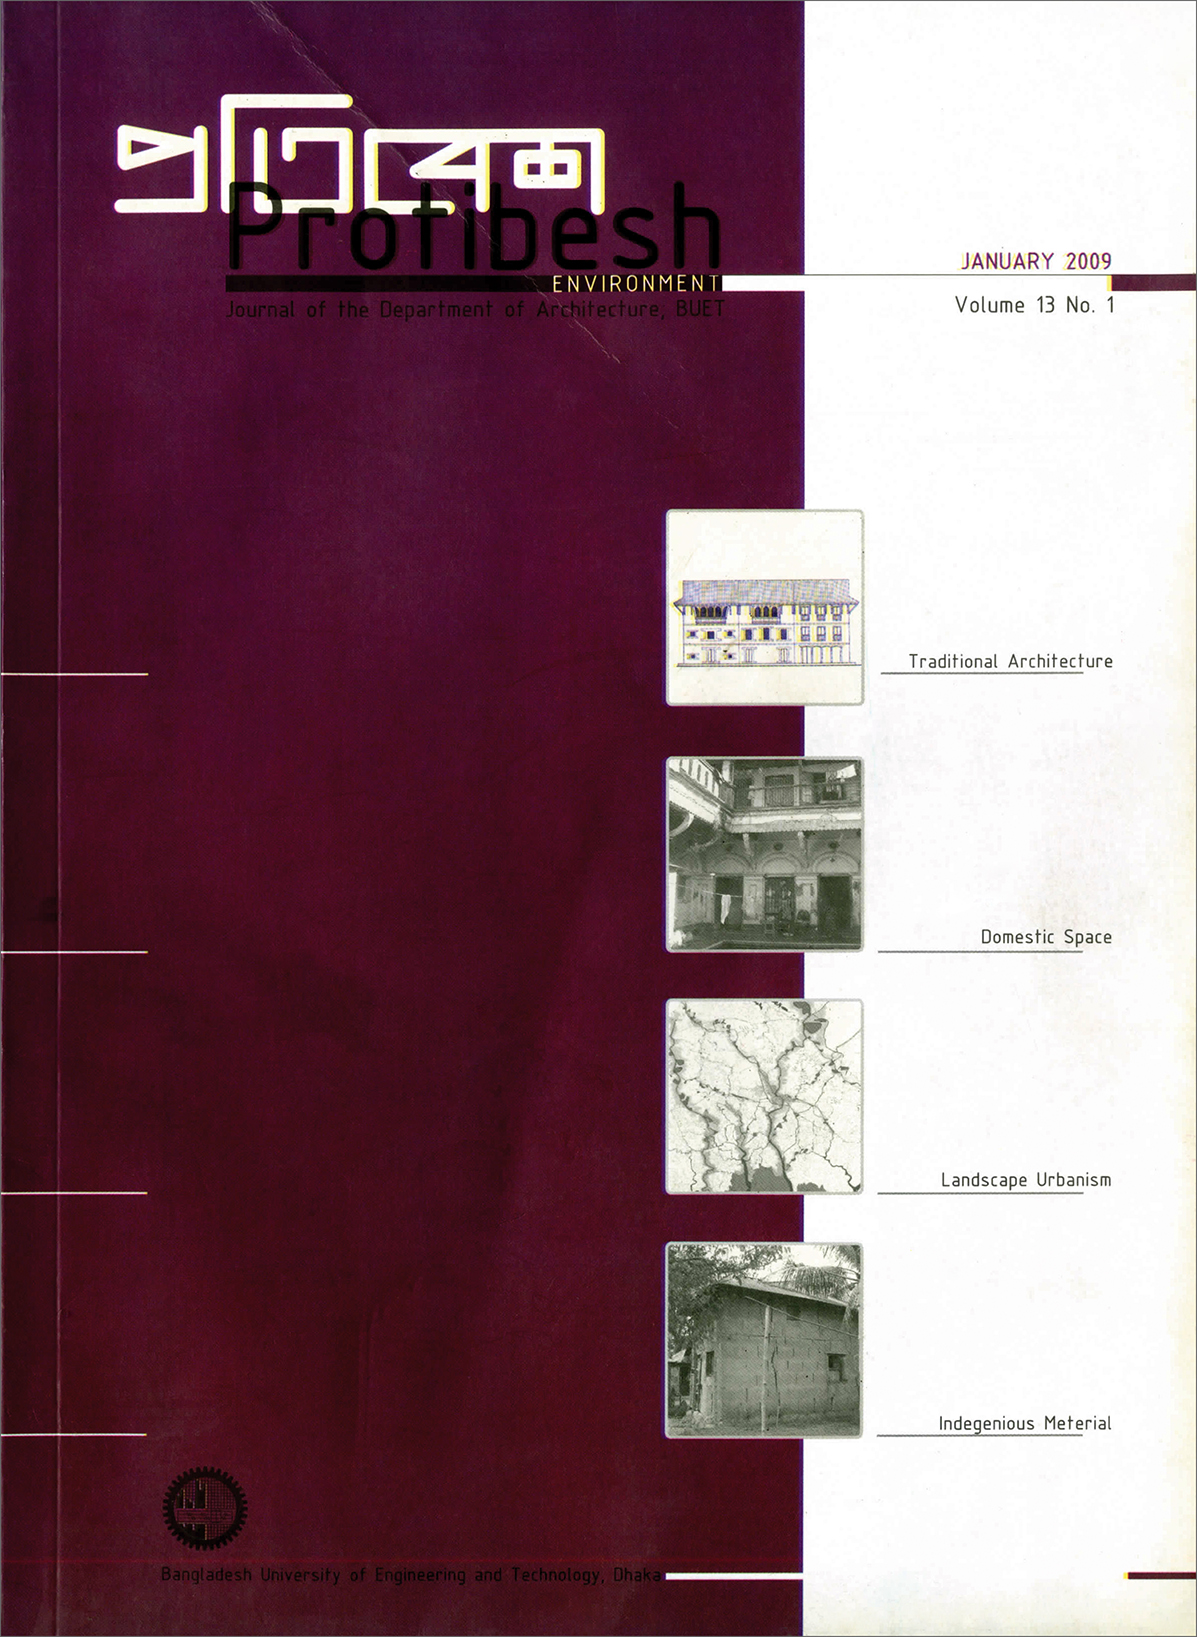 Cover image of Protibesh Vol-13 No-01 January-2009 - Journal of the Department of Architecture, BUET